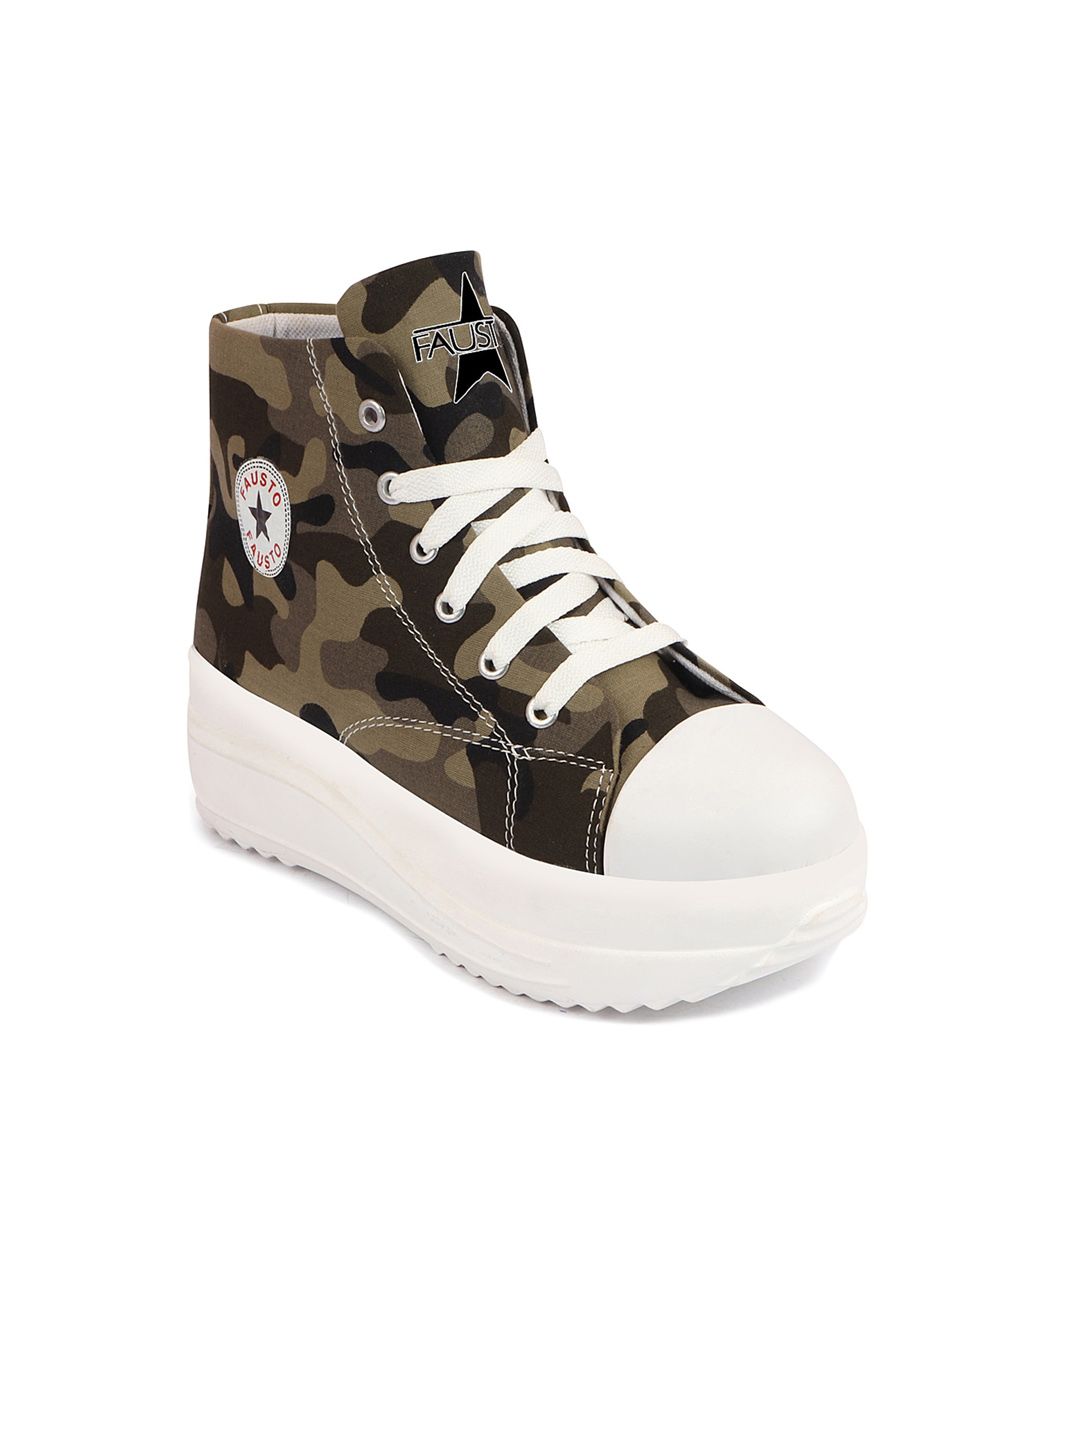 FAUSTO Women Printed Mid Top Lightweight Canvas Sneakers Price in India